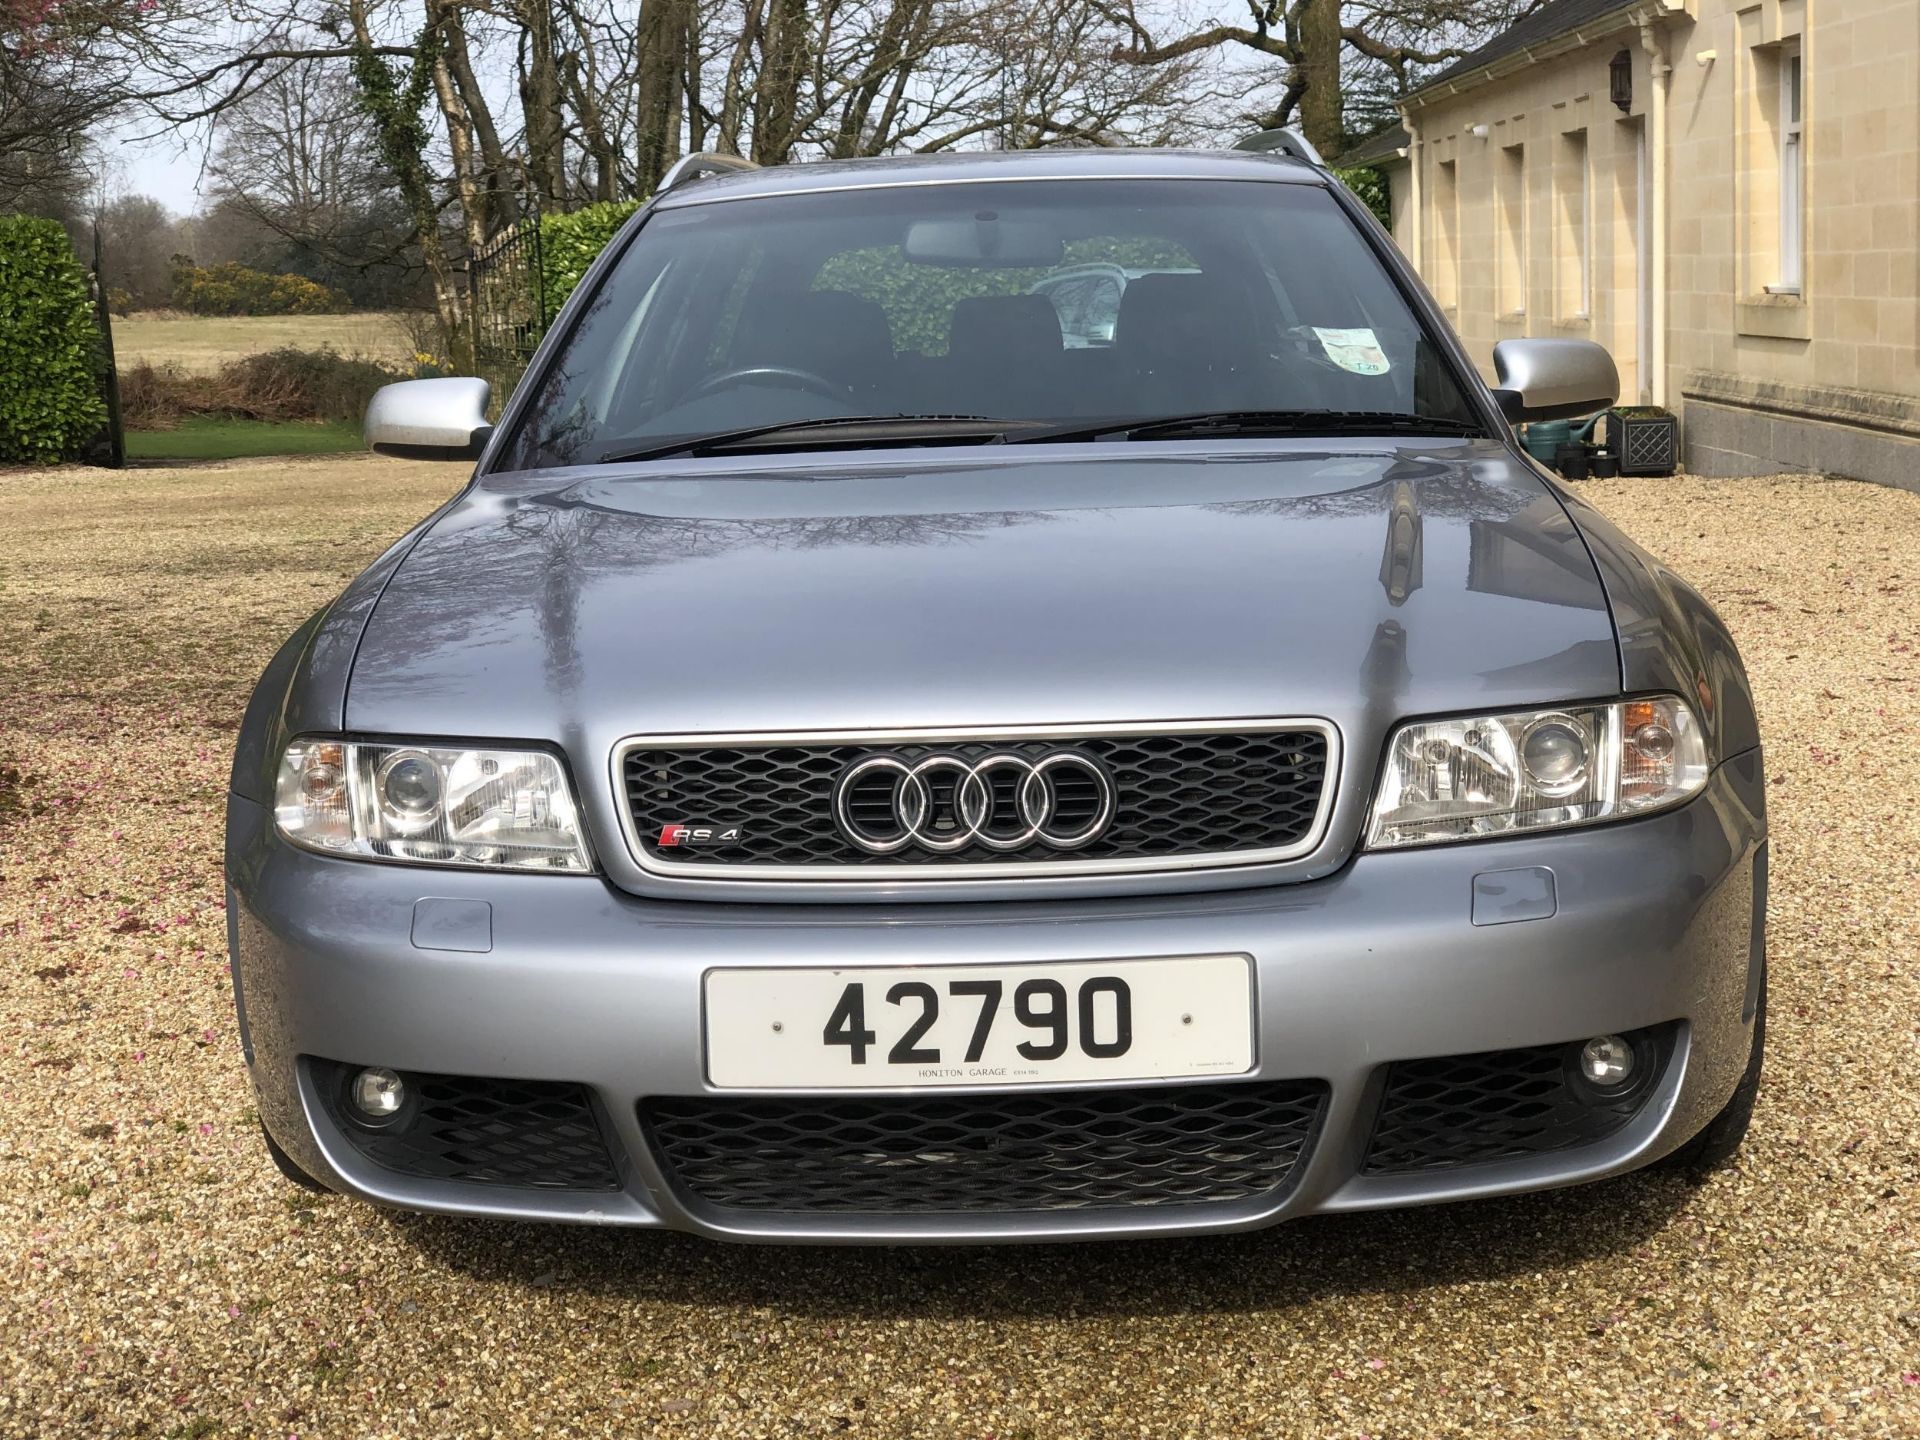 2000 Audi RS4 Avant B5 Registration number 42790 Chassis number WUAZZZ8DZ1N900940 Engine number - Image 3 of 46